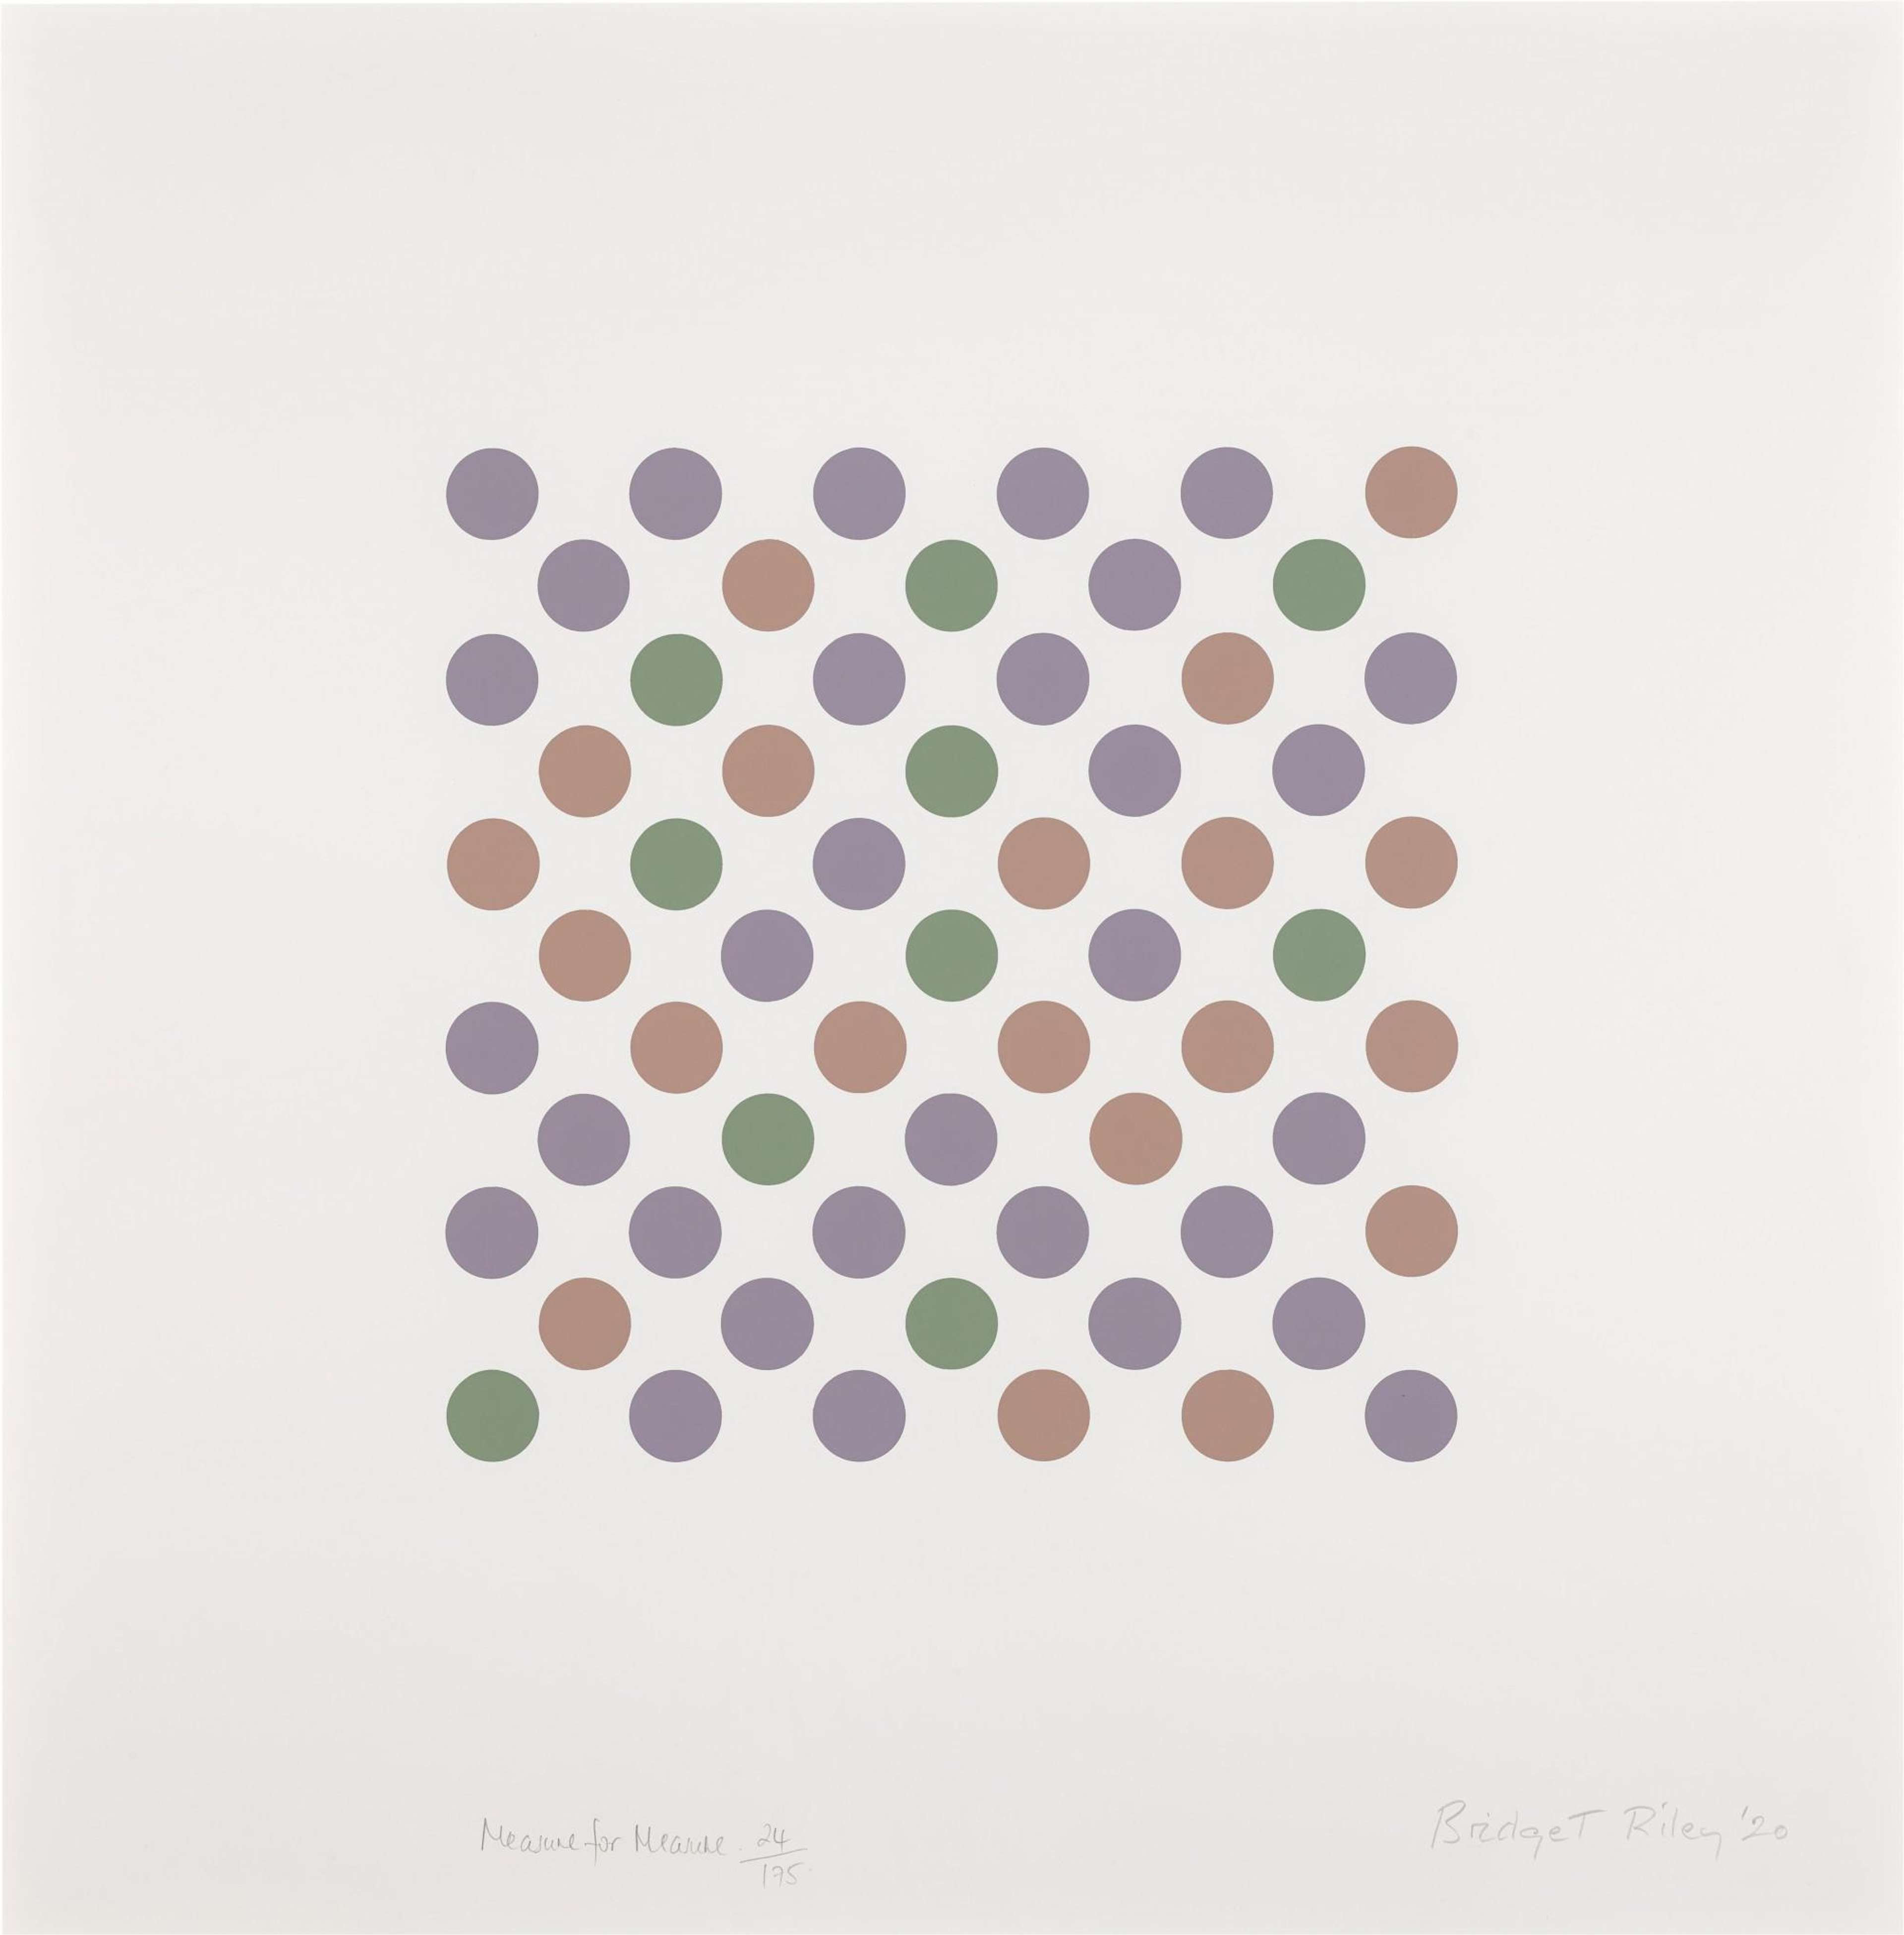 In this print, Riley arranges a collection of spots, all identical in size, in a grid formation. The spots are rendered in green, purple and brown against a plain white backdrop. Evenly spaced out, they evoke a sense of mechanical precision.